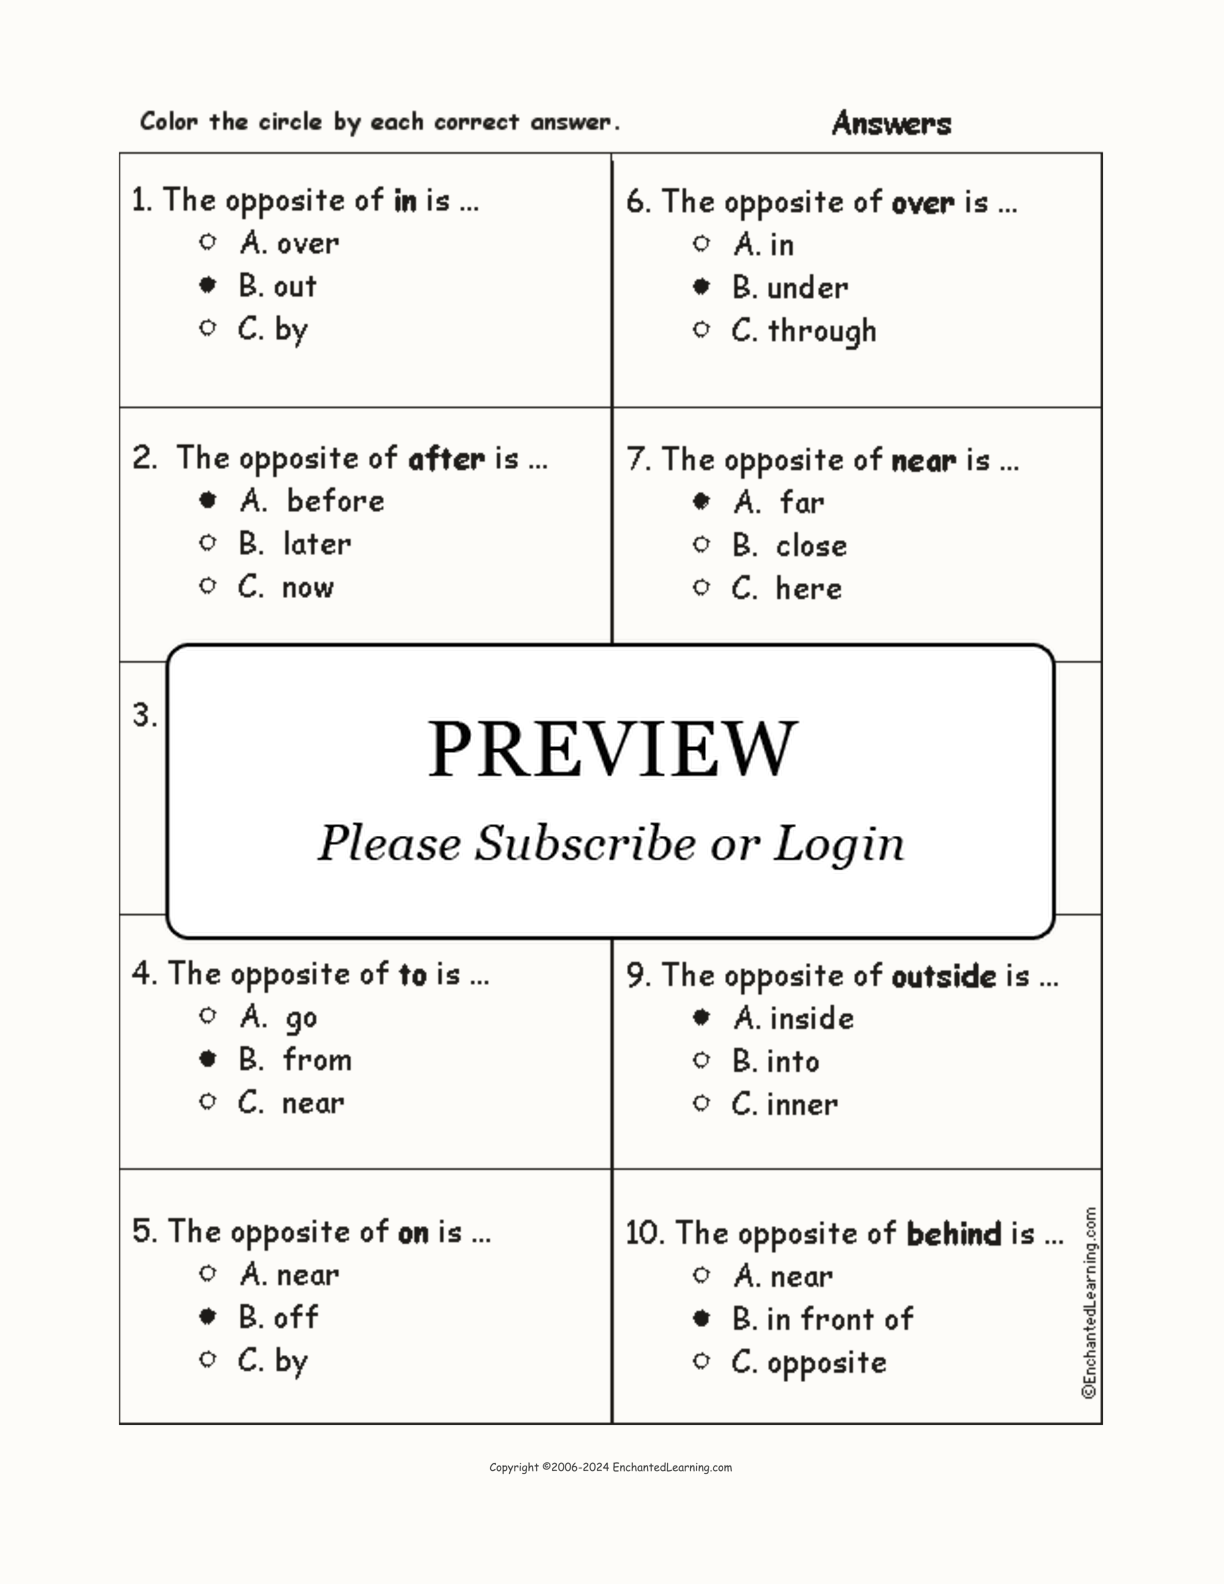 Opposites of Prepositions Quiz interactive worksheet page 2